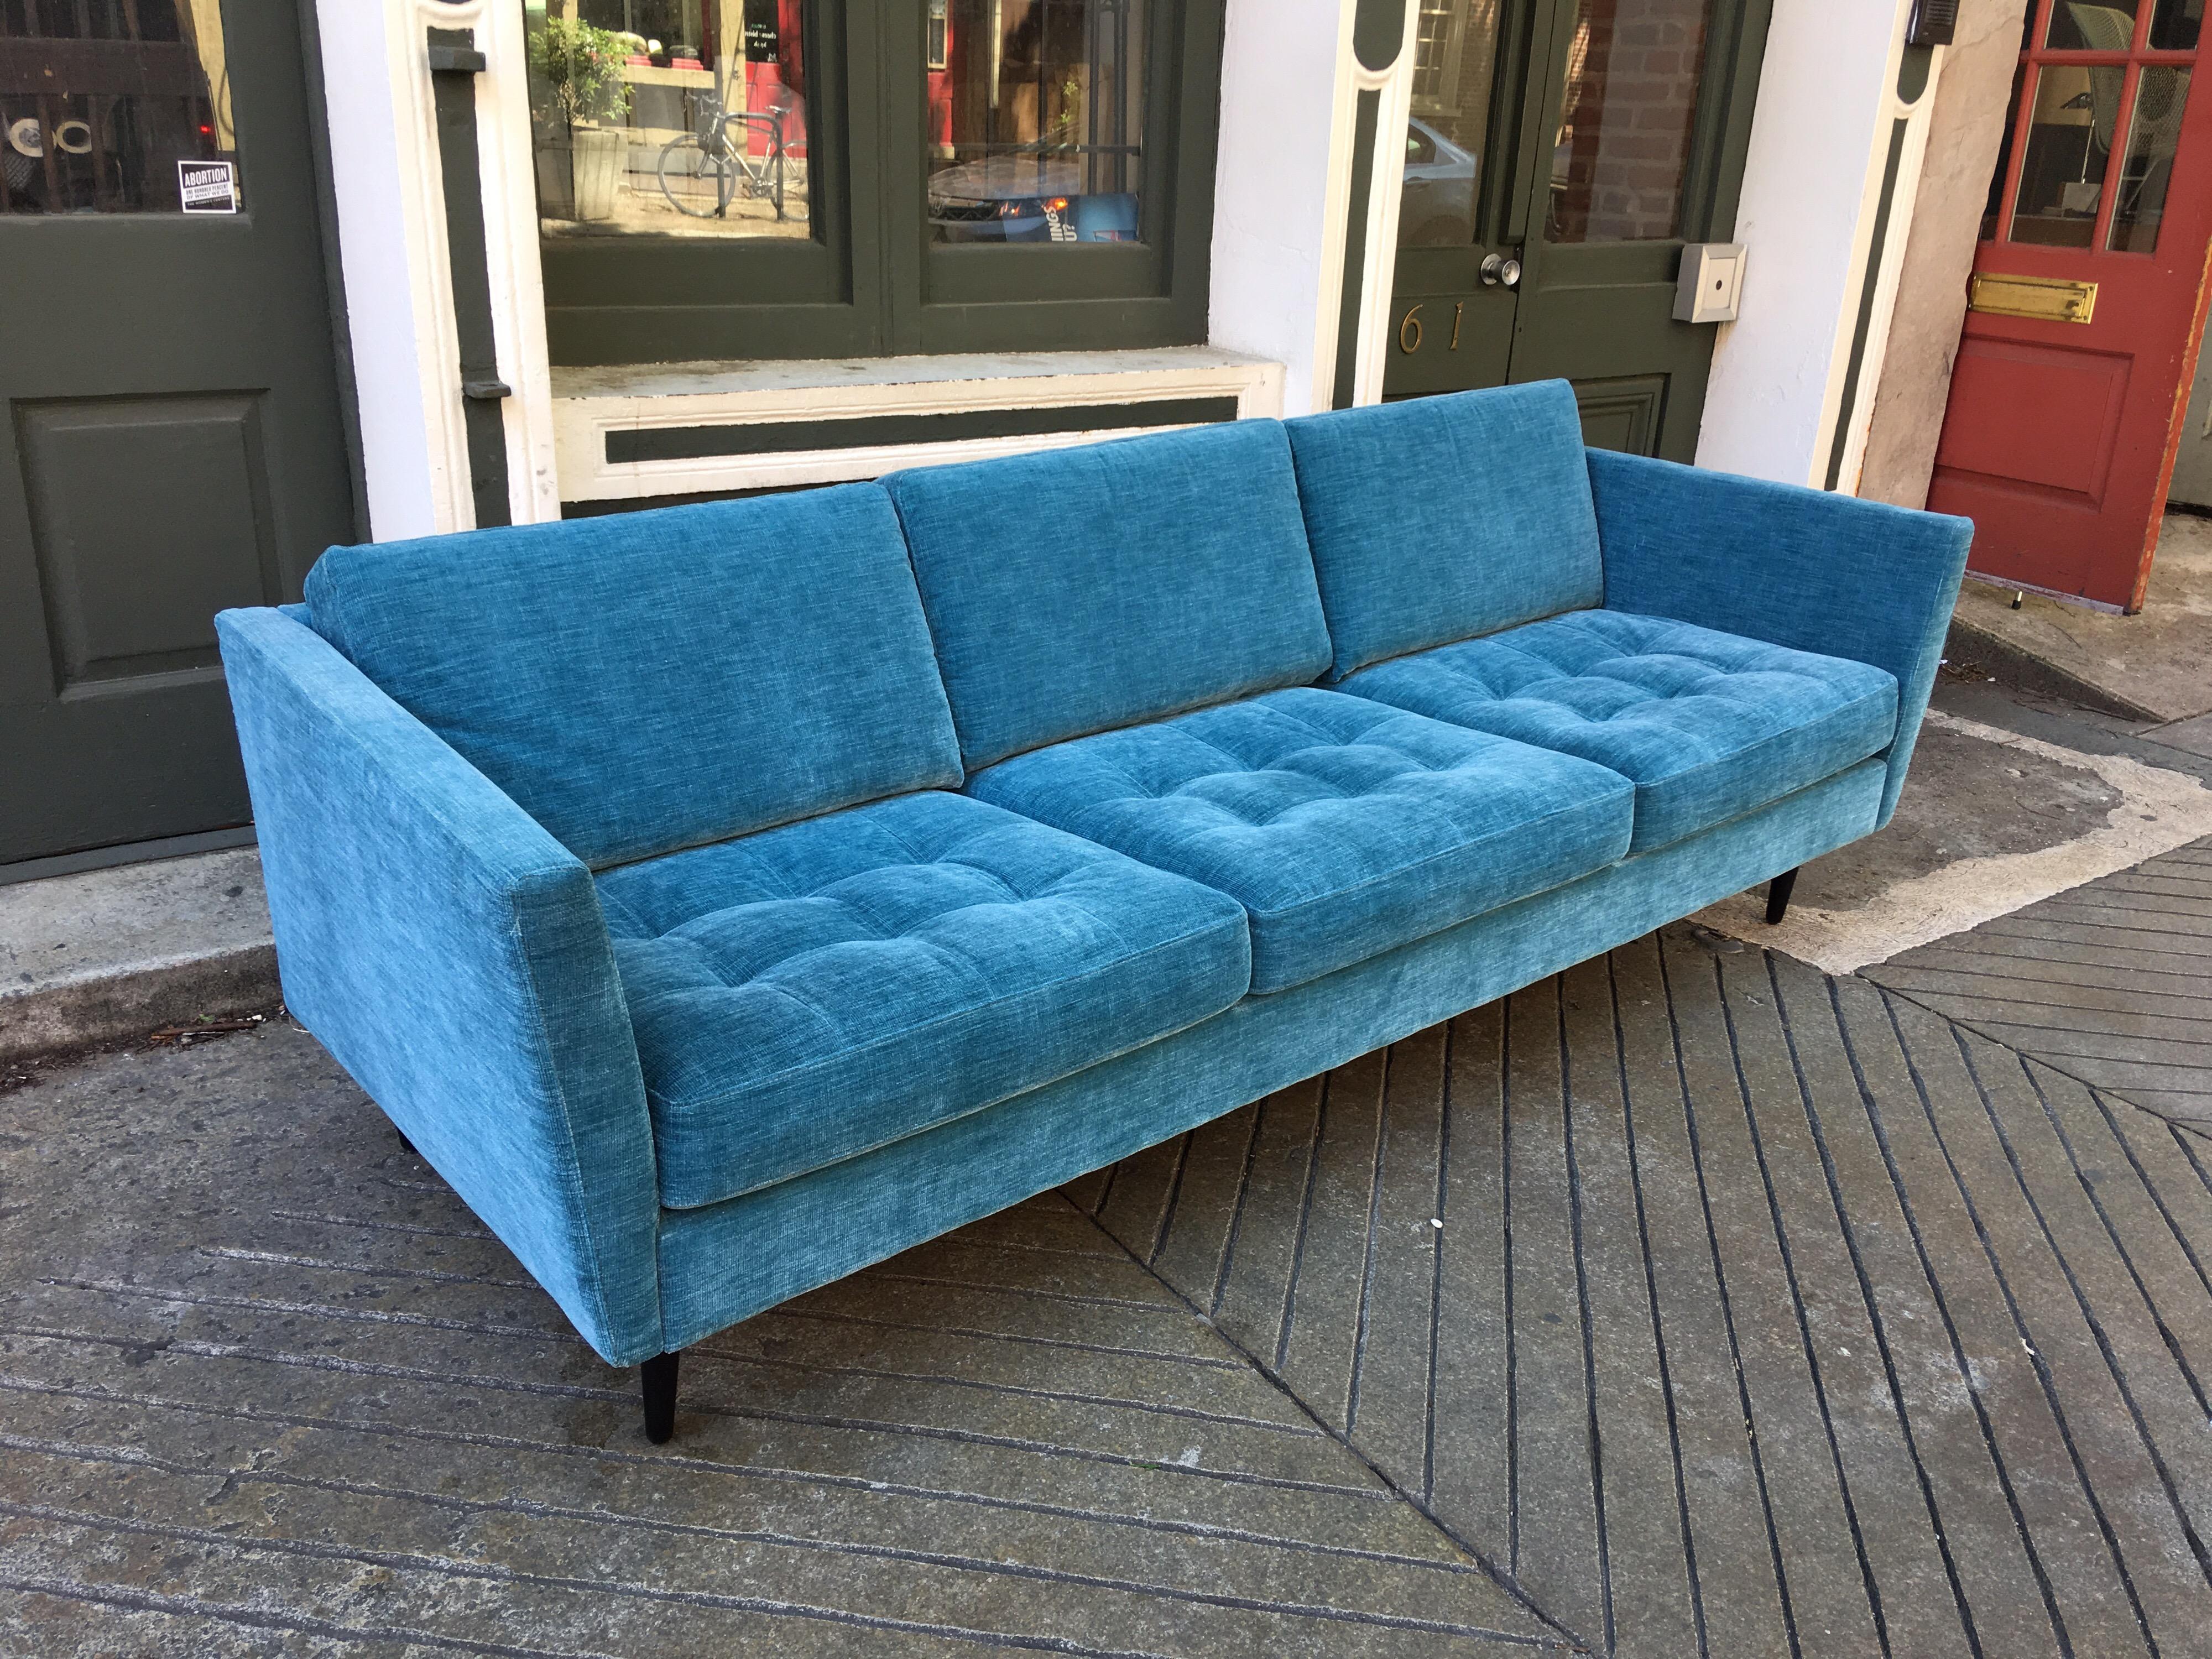 Recent Design BoConcept sofa in a great blue fabric sort of like a corduroy! Only a couple years old, move to the west coast makes this sofa available! Pieced fabric seat cushion design reminiscent of Florence Knoll Designs!